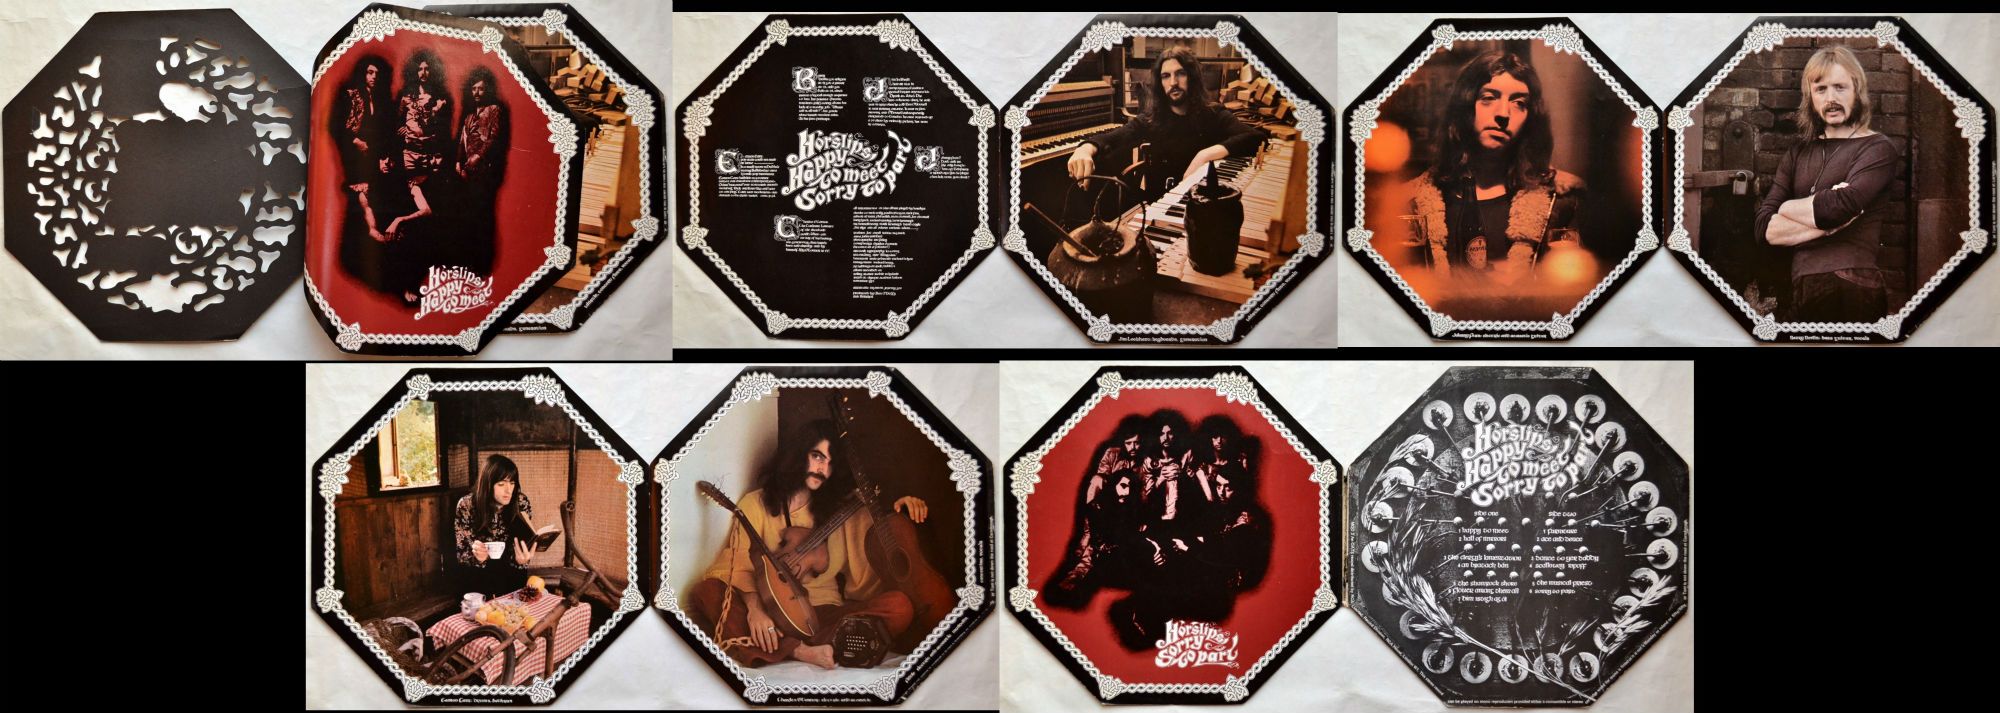 Horslips / Happy To Meet...Sorry To Part (1st Issue Octagon Jacket)β